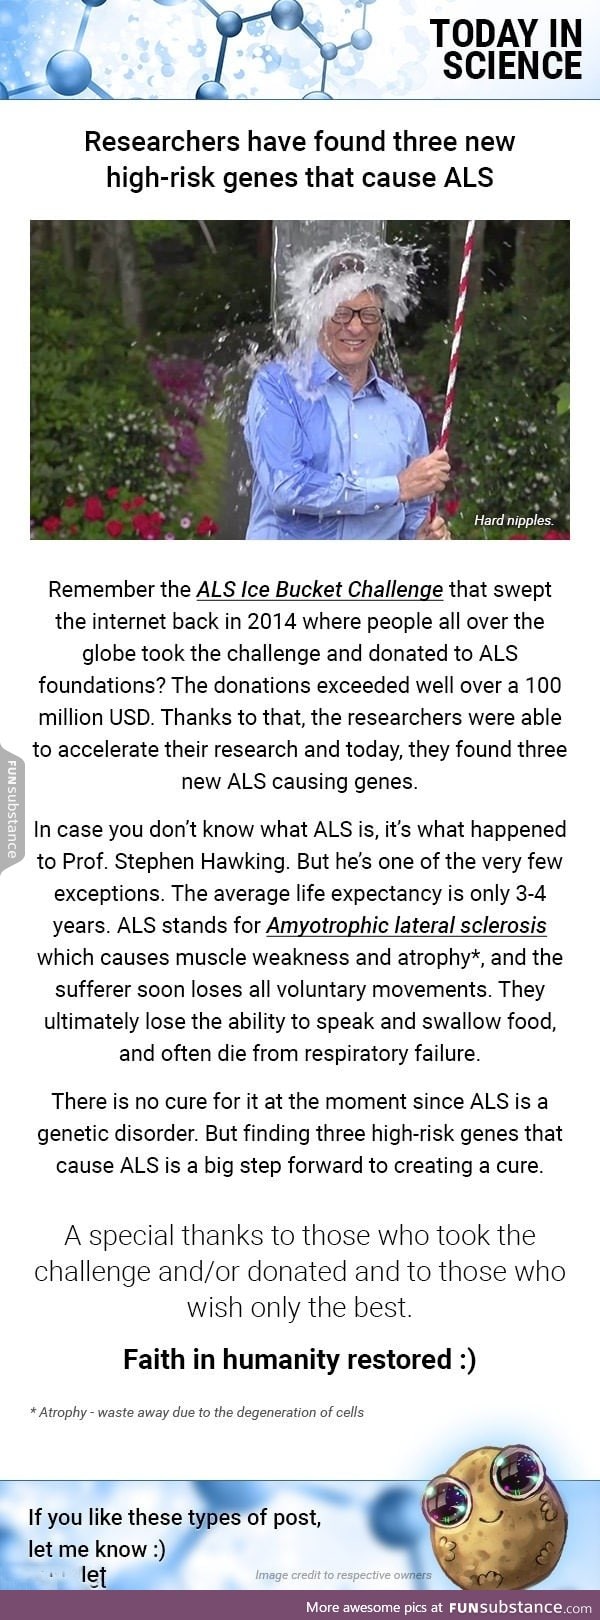 Today in Science: ALS causing genes discovered